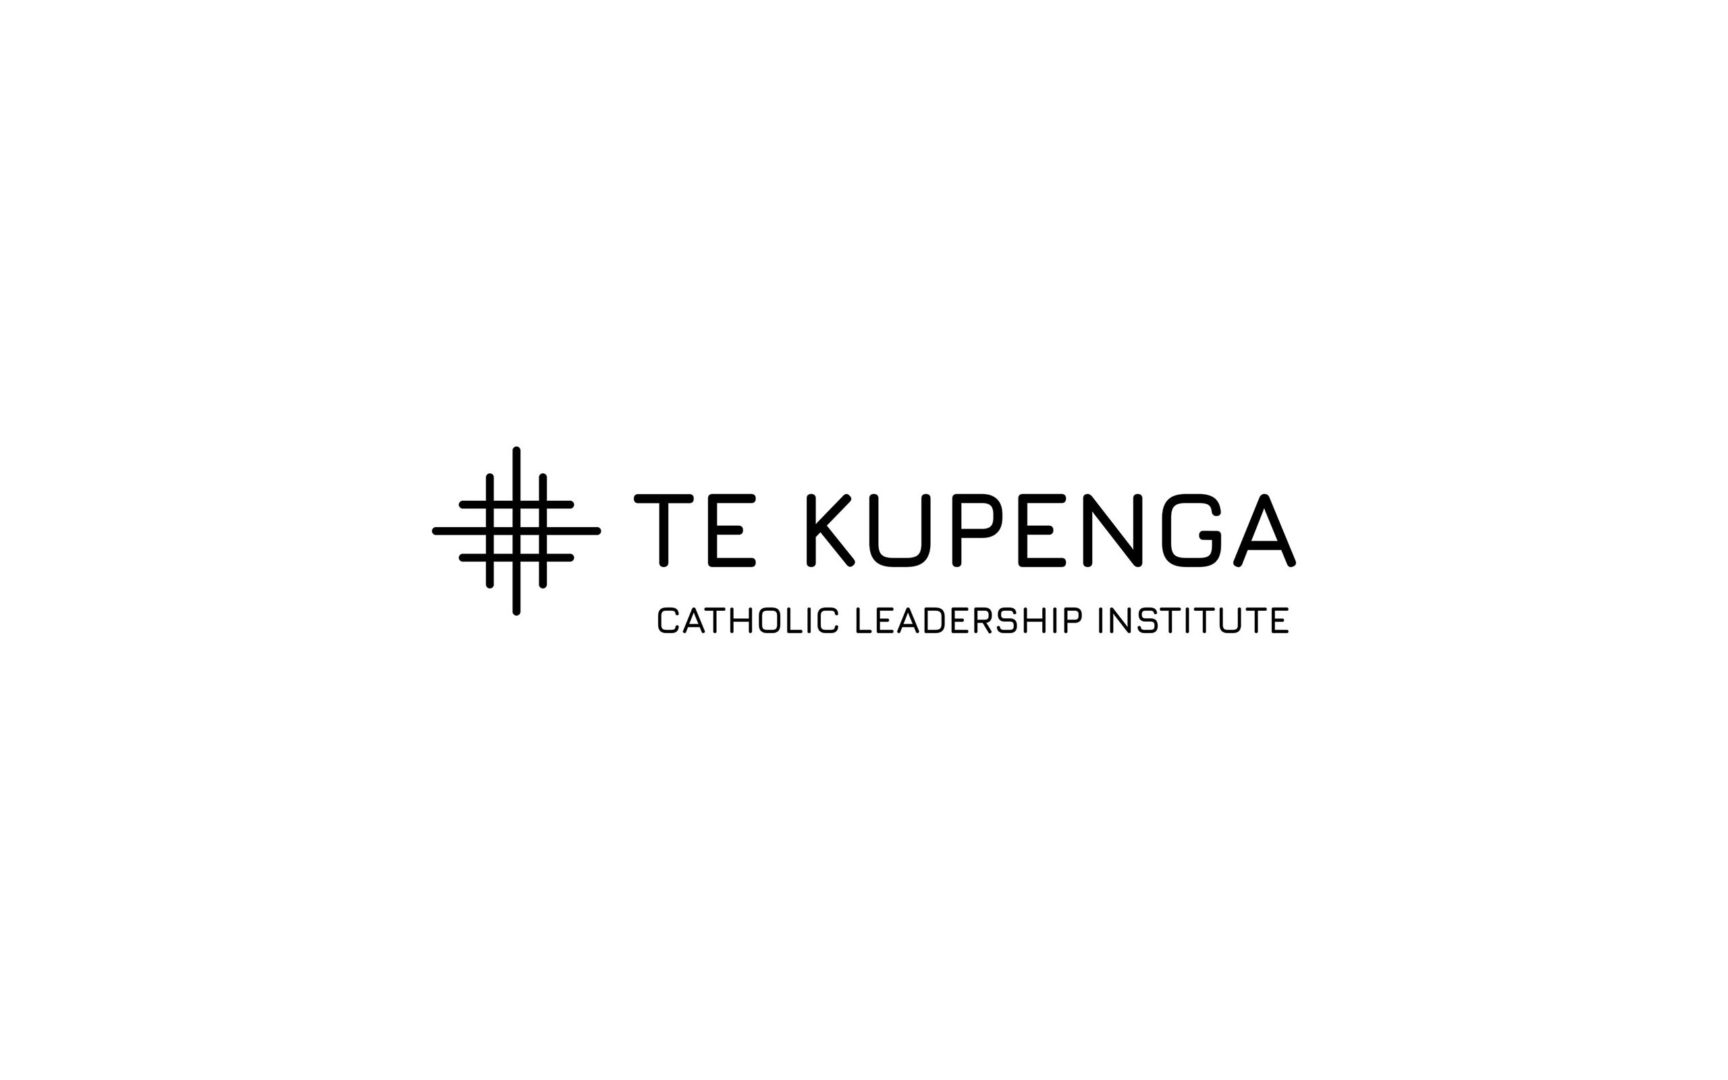 A brand that is Unified. Te Kupenga is a new 'mother' brand for an existing stable of Catholic organisations. We defined a brand architecture, developed the identities and designed/build the website.